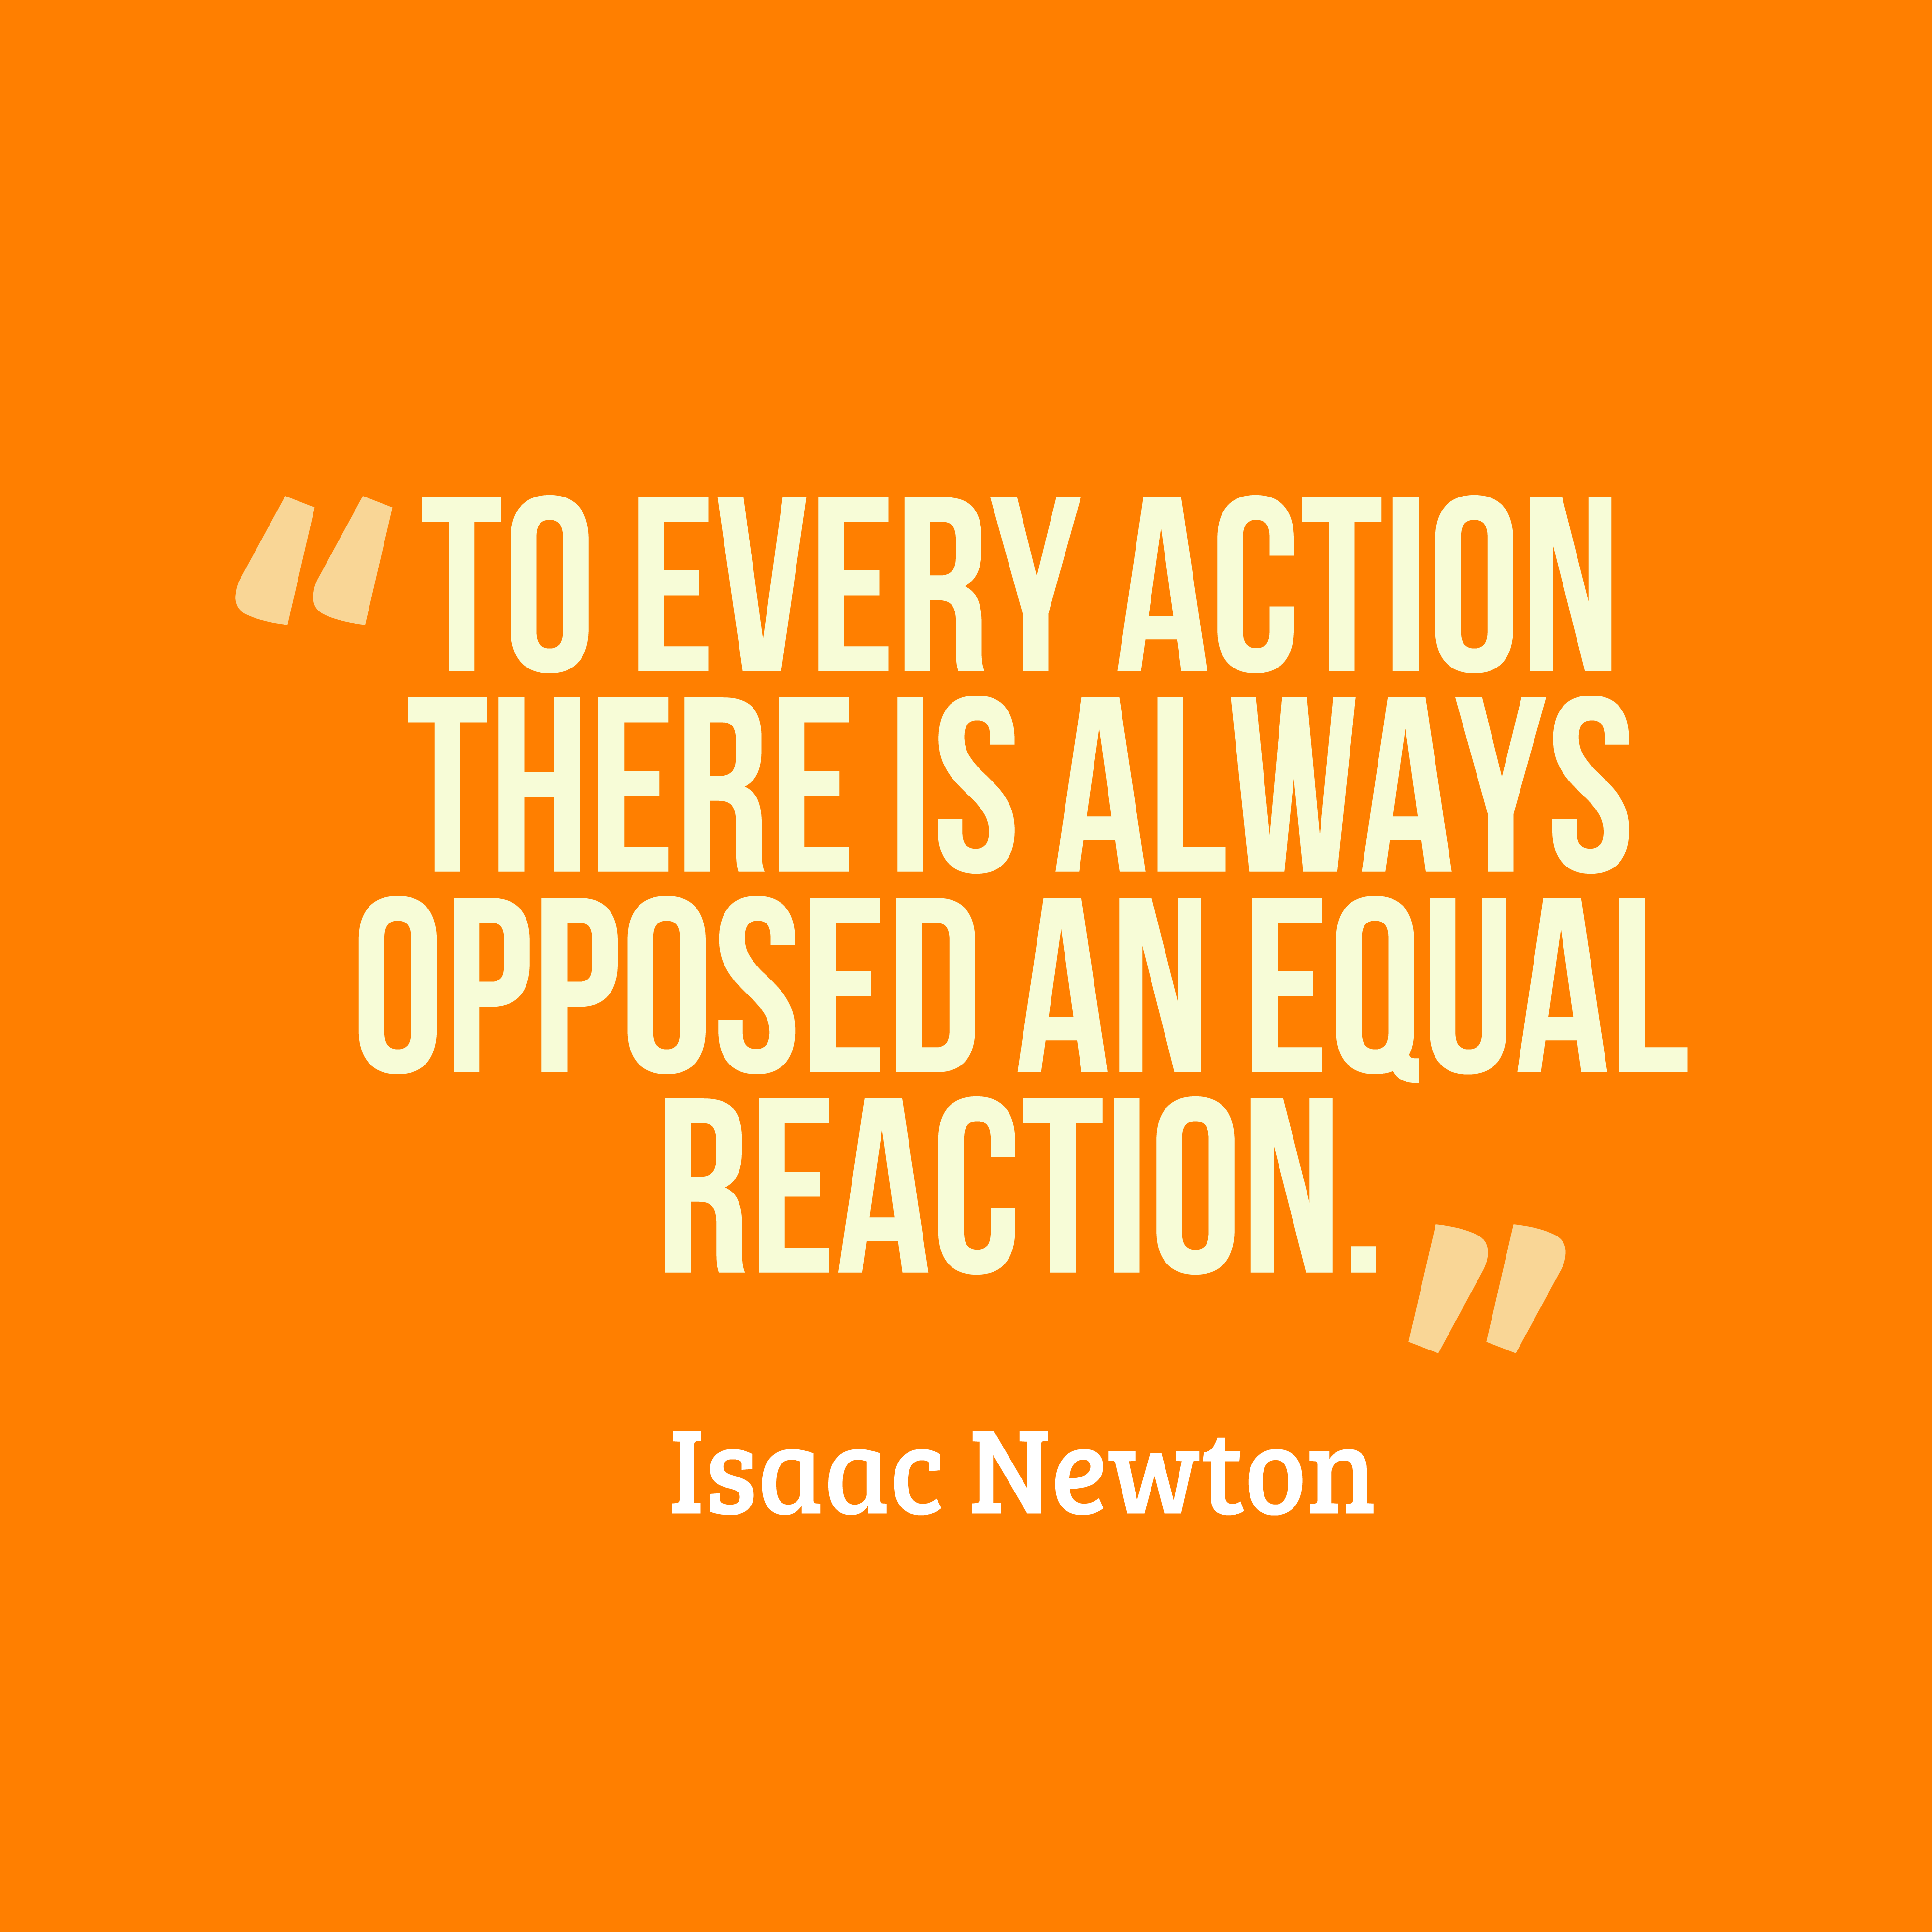 To every action there is always opposed an equal reaction.